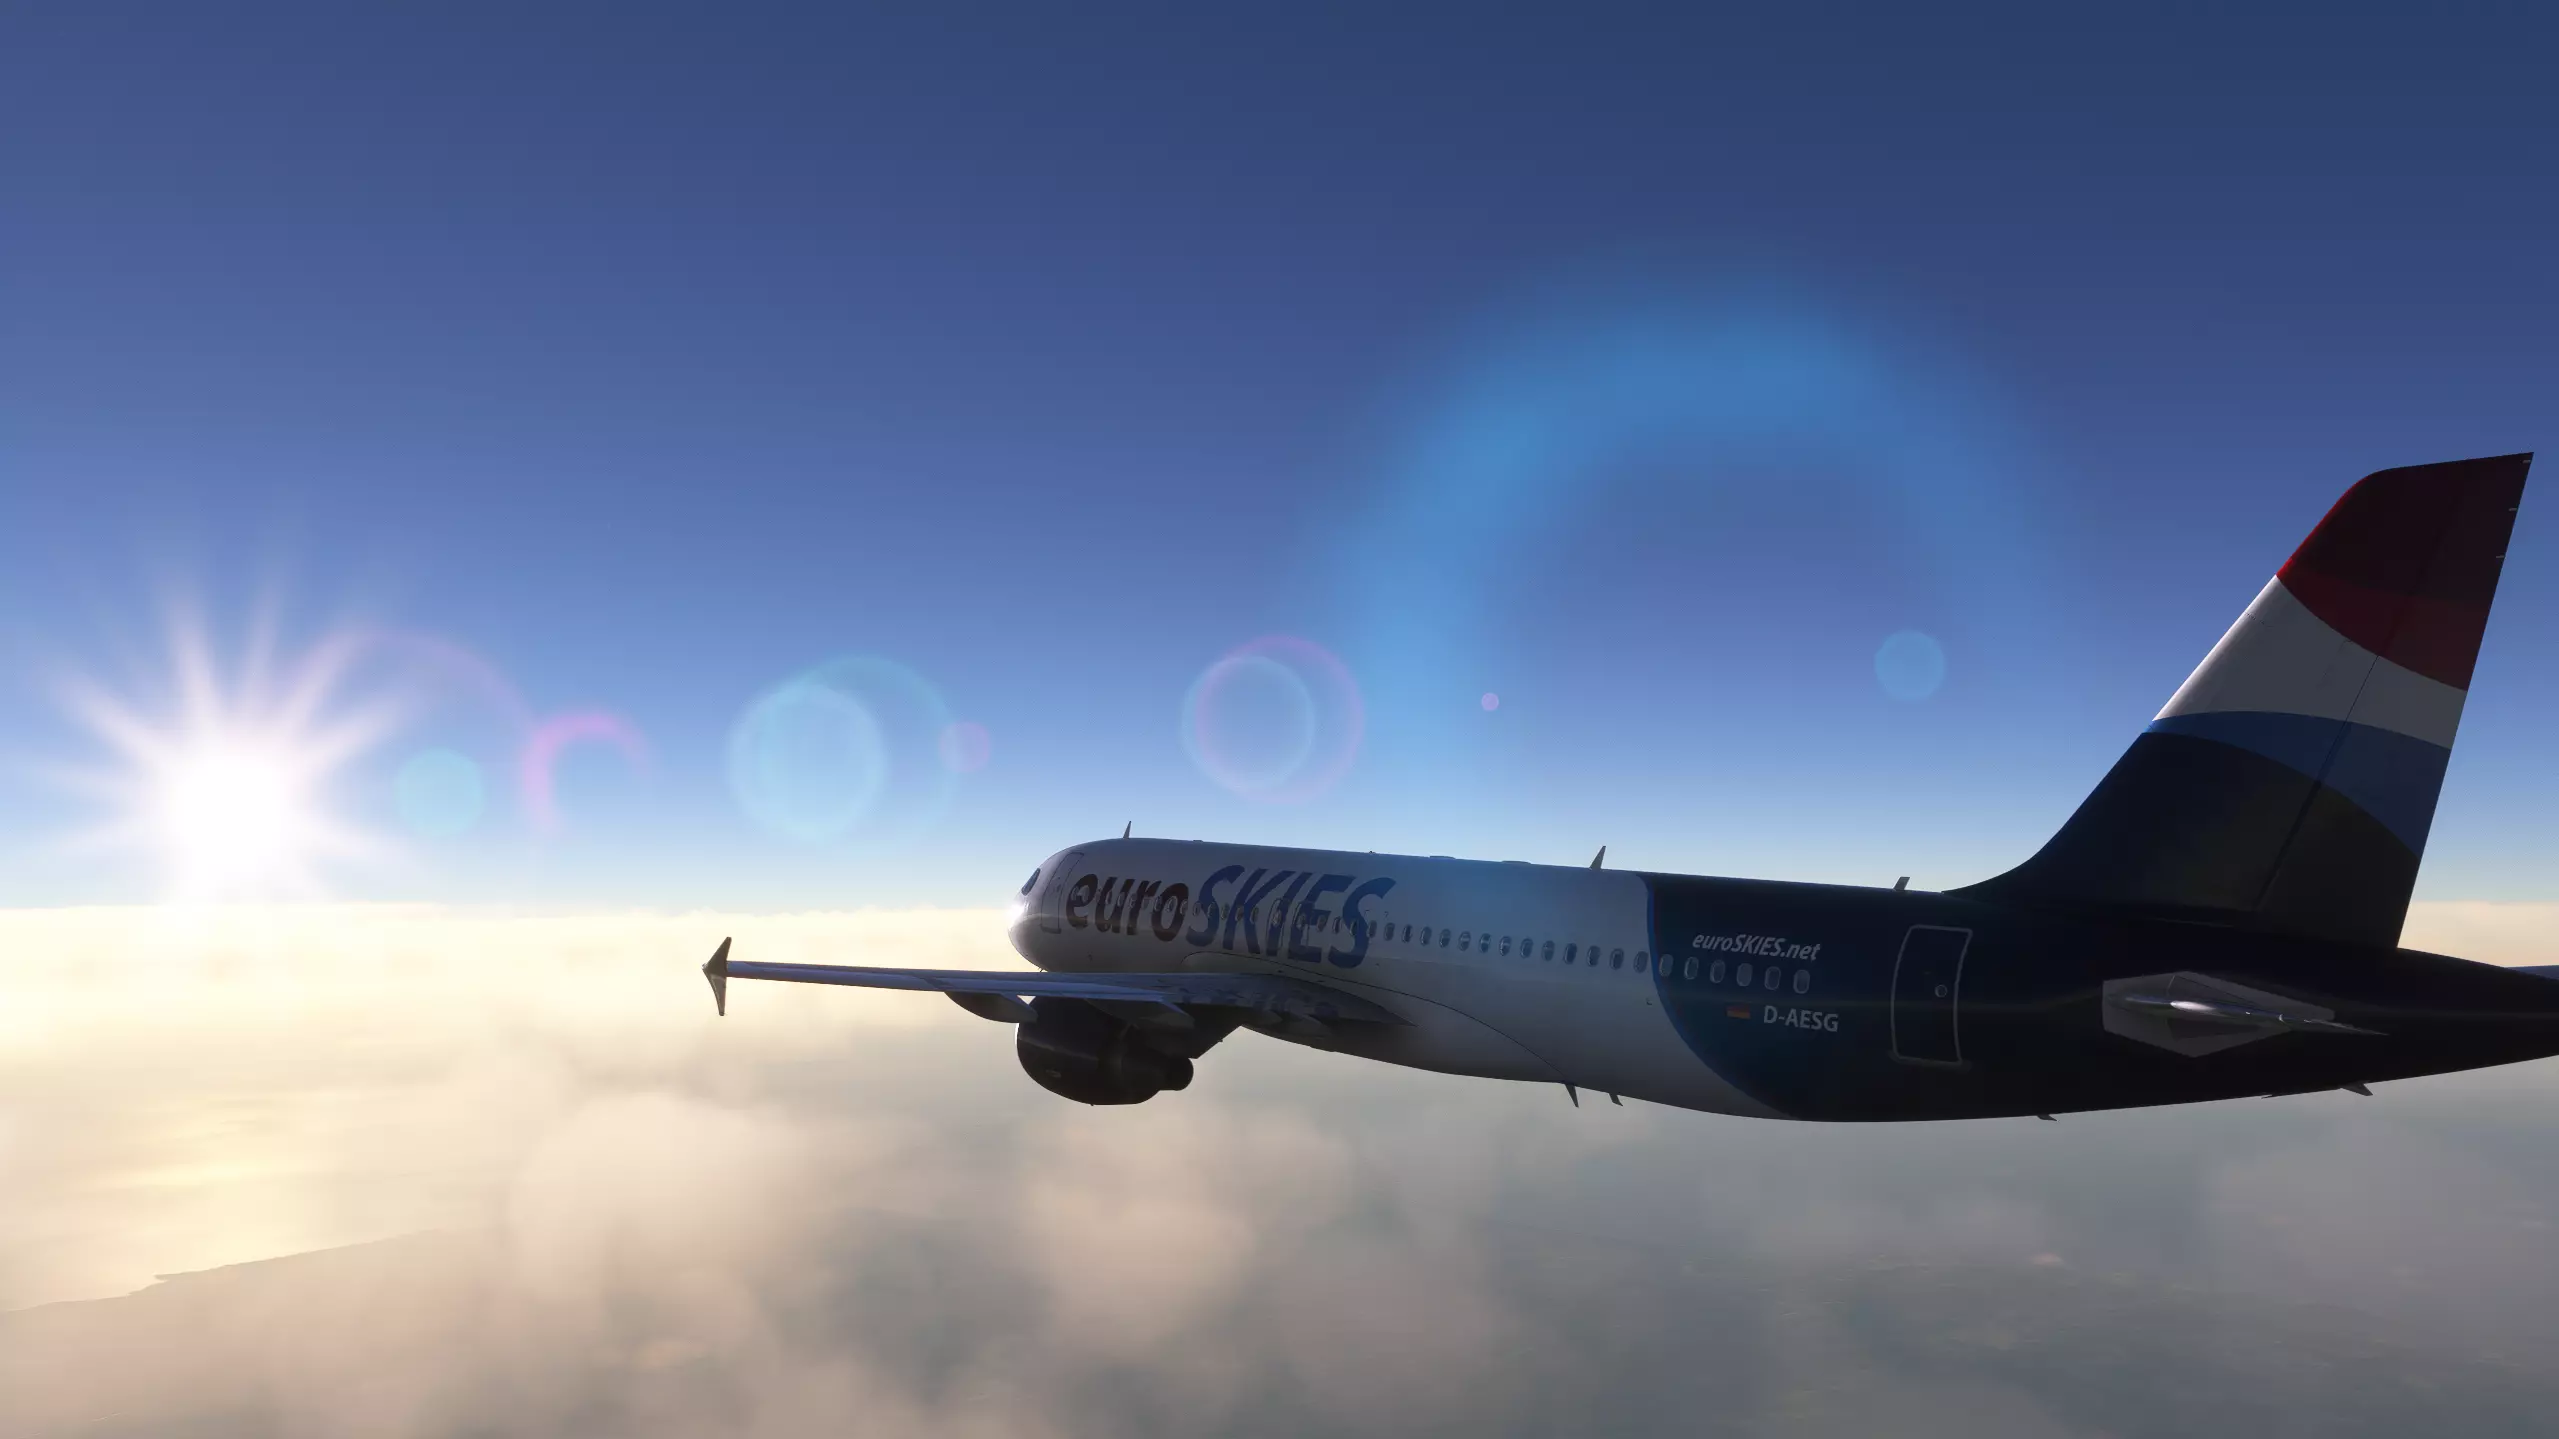 euroSKIES virtual airline airbus A320 Fleet aircraft flying into the sun 